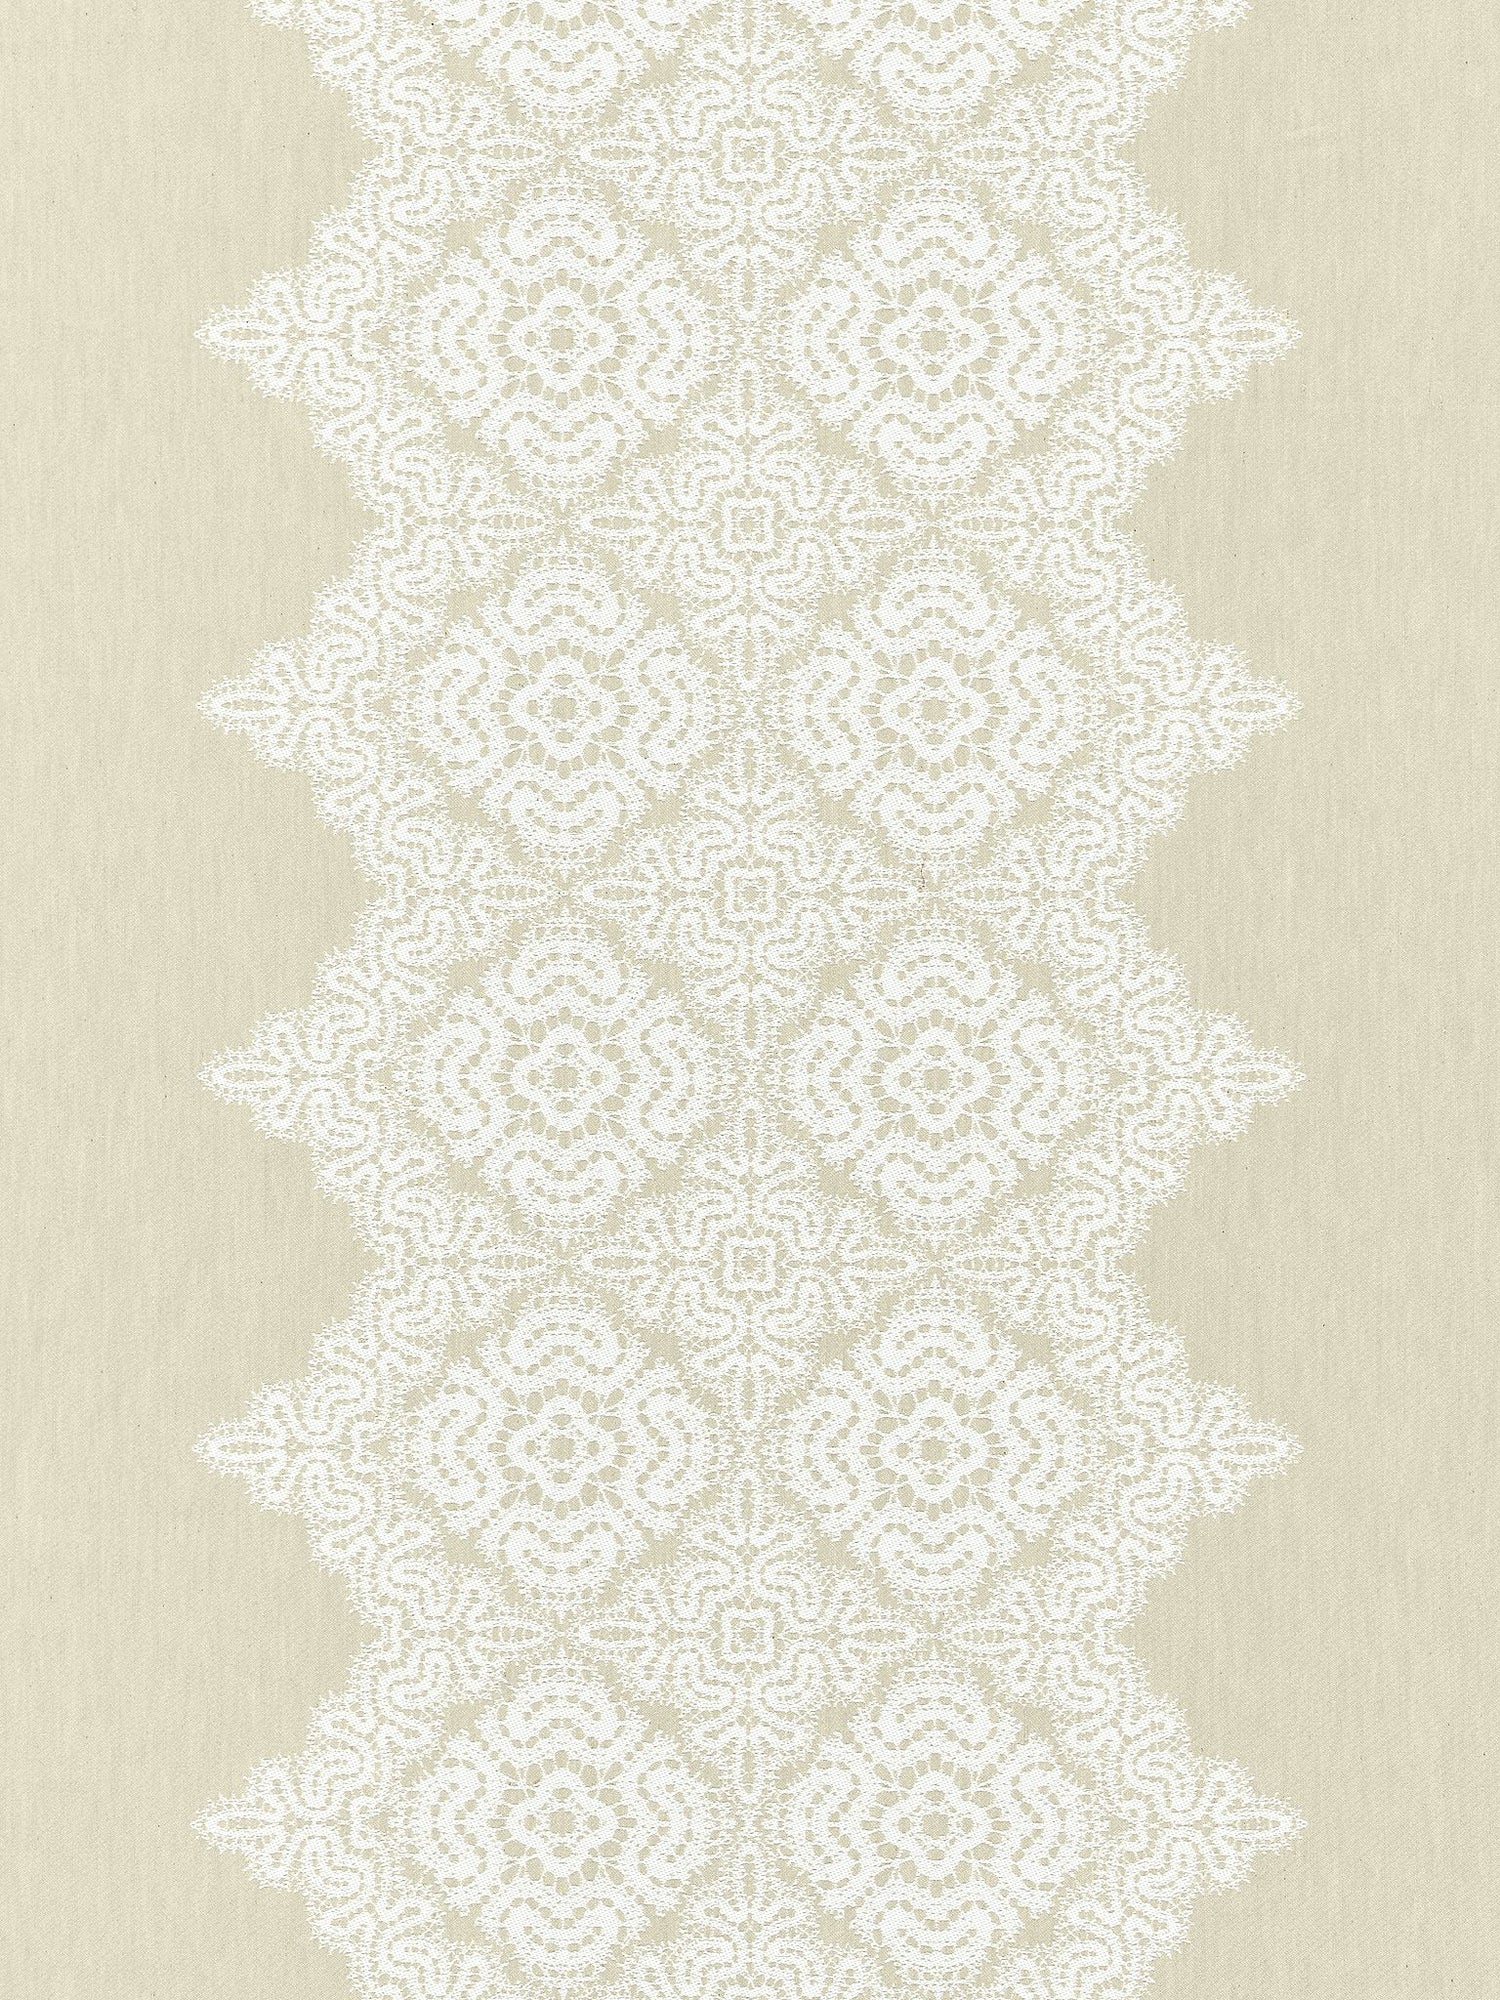 Josephine fabric in sand color - pattern number SC 000127168 - by Scalamandre in the Scalamandre Fabrics Book 1 collection